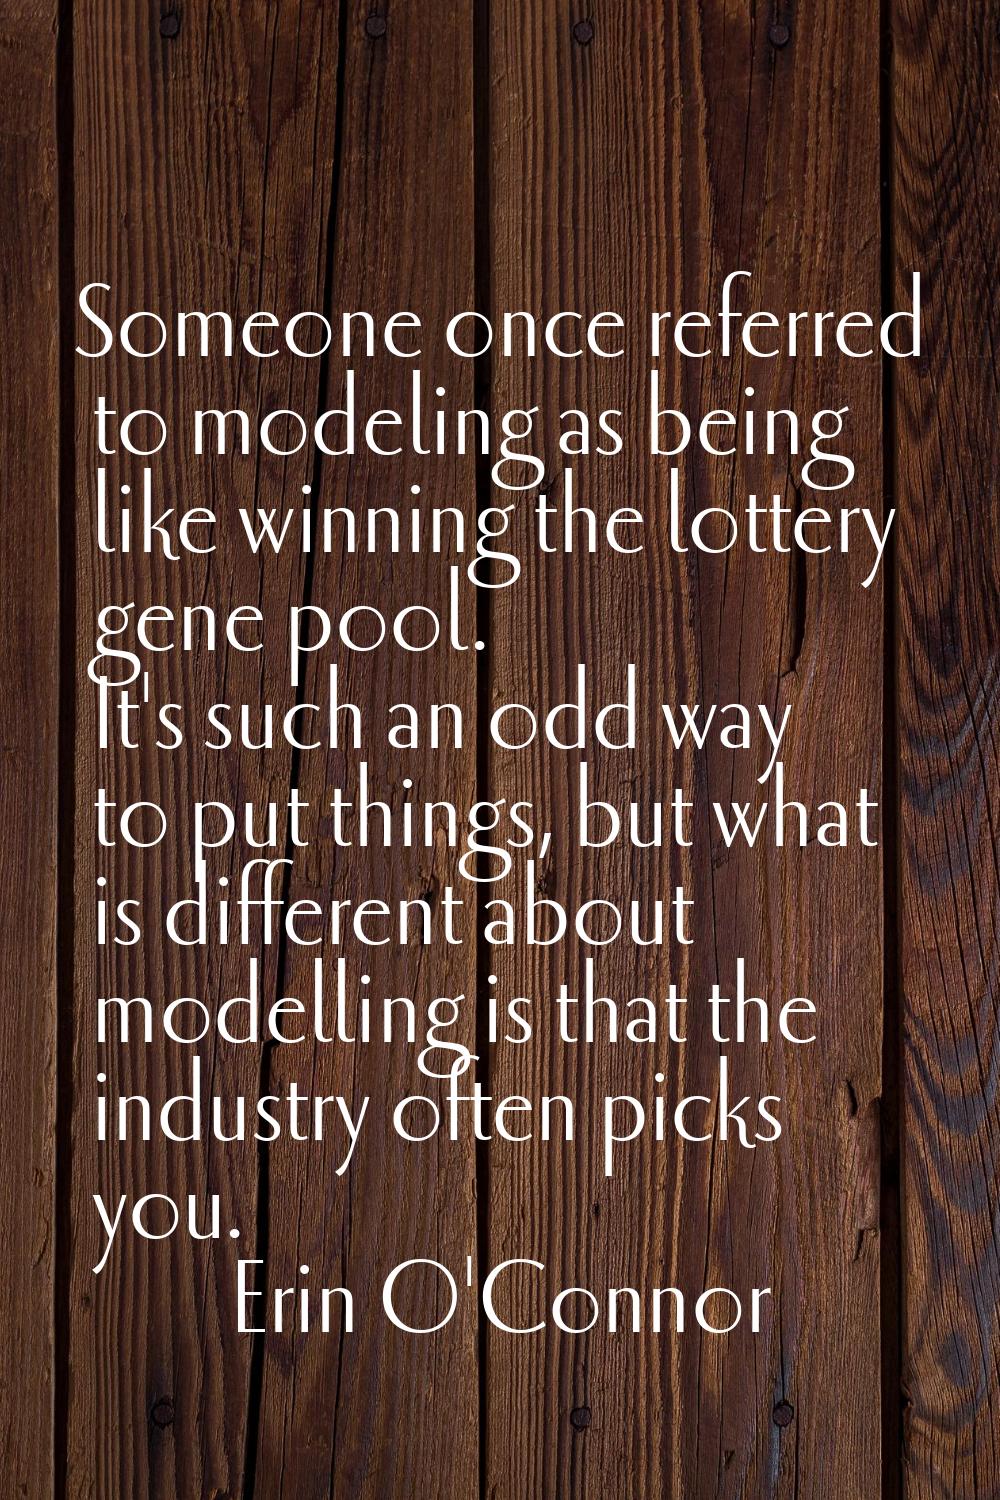 Someone once referred to modeling as being like winning the lottery gene pool. It's such an odd way